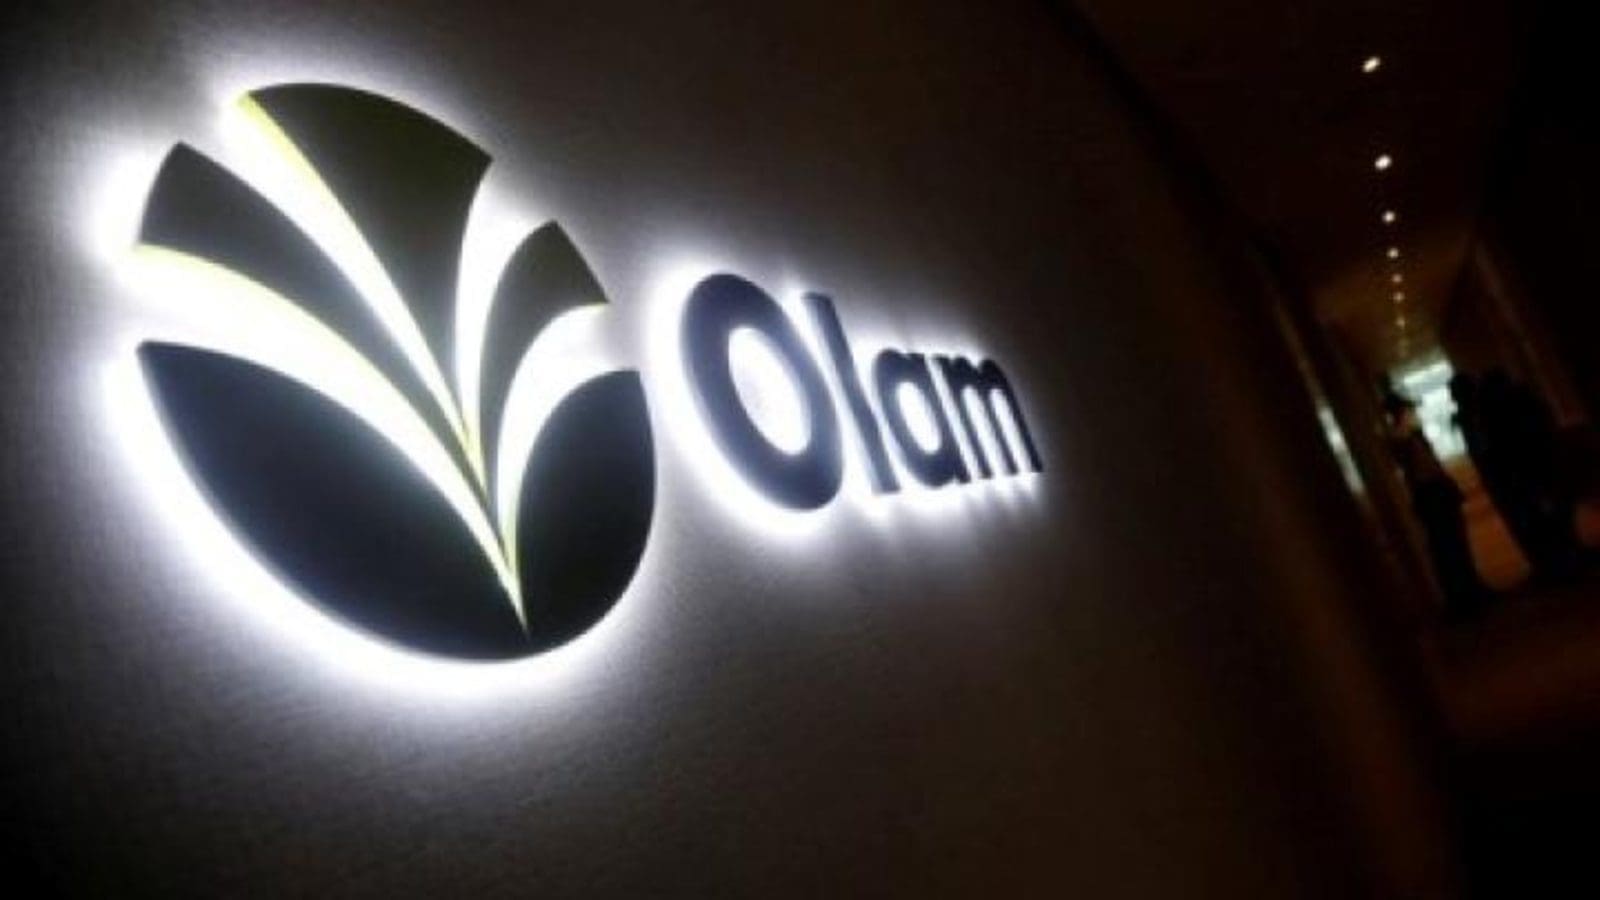 Olam Group schemes on listing Olam Agric dual IPO by the first half of 2023